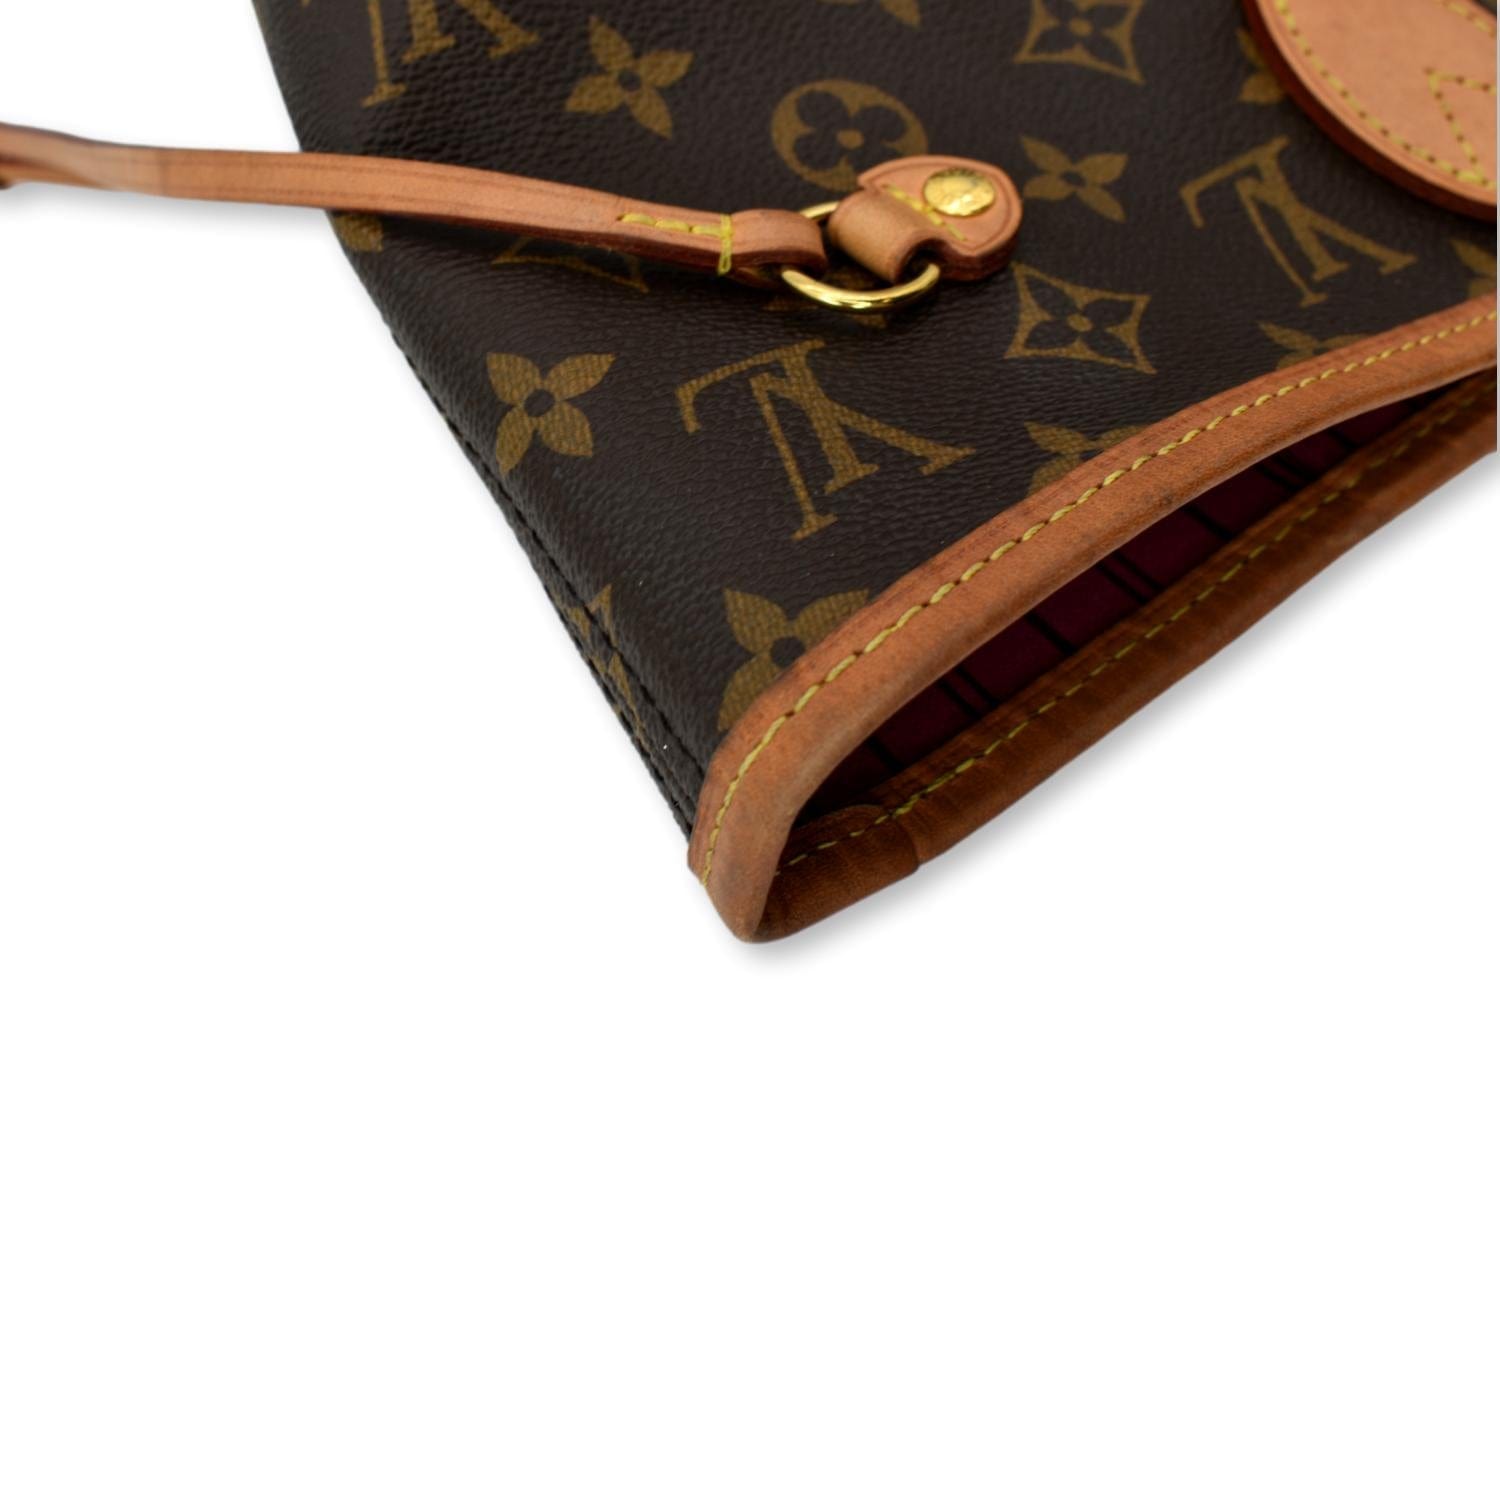 Louis Vuitton Neverfull Brown Monogram, AR3058, No rips or tears